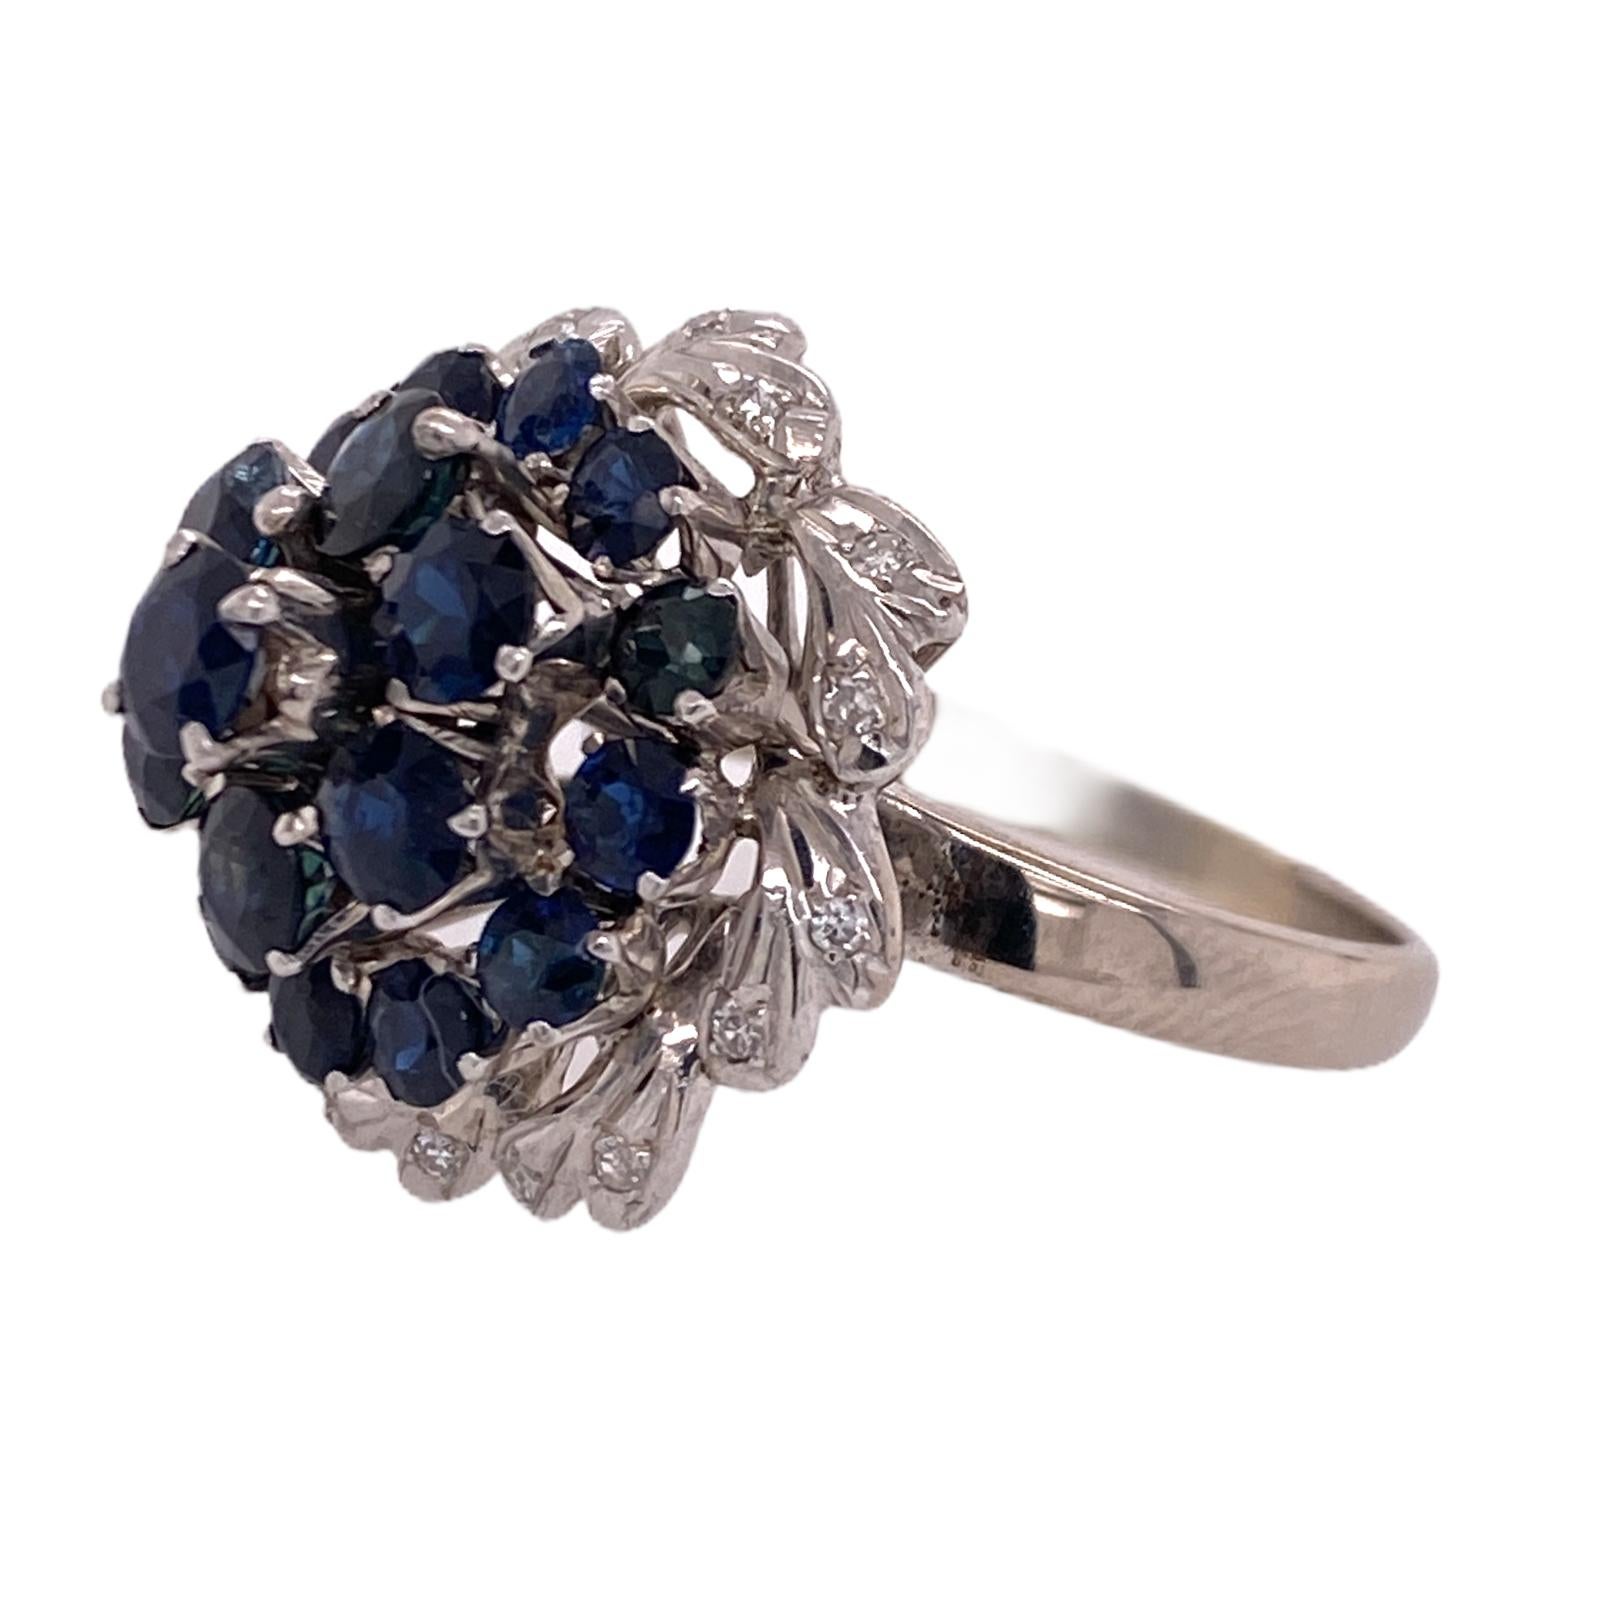 Fabulous 1960's blue sapphire diamond dome ring fashioned in 18 karat white gold. The ring features 19 natural blue sapphires weighing approximately 3.00 carat total weight. The diamonds are surrounded by 16 round brilliant cut diamonds weighing